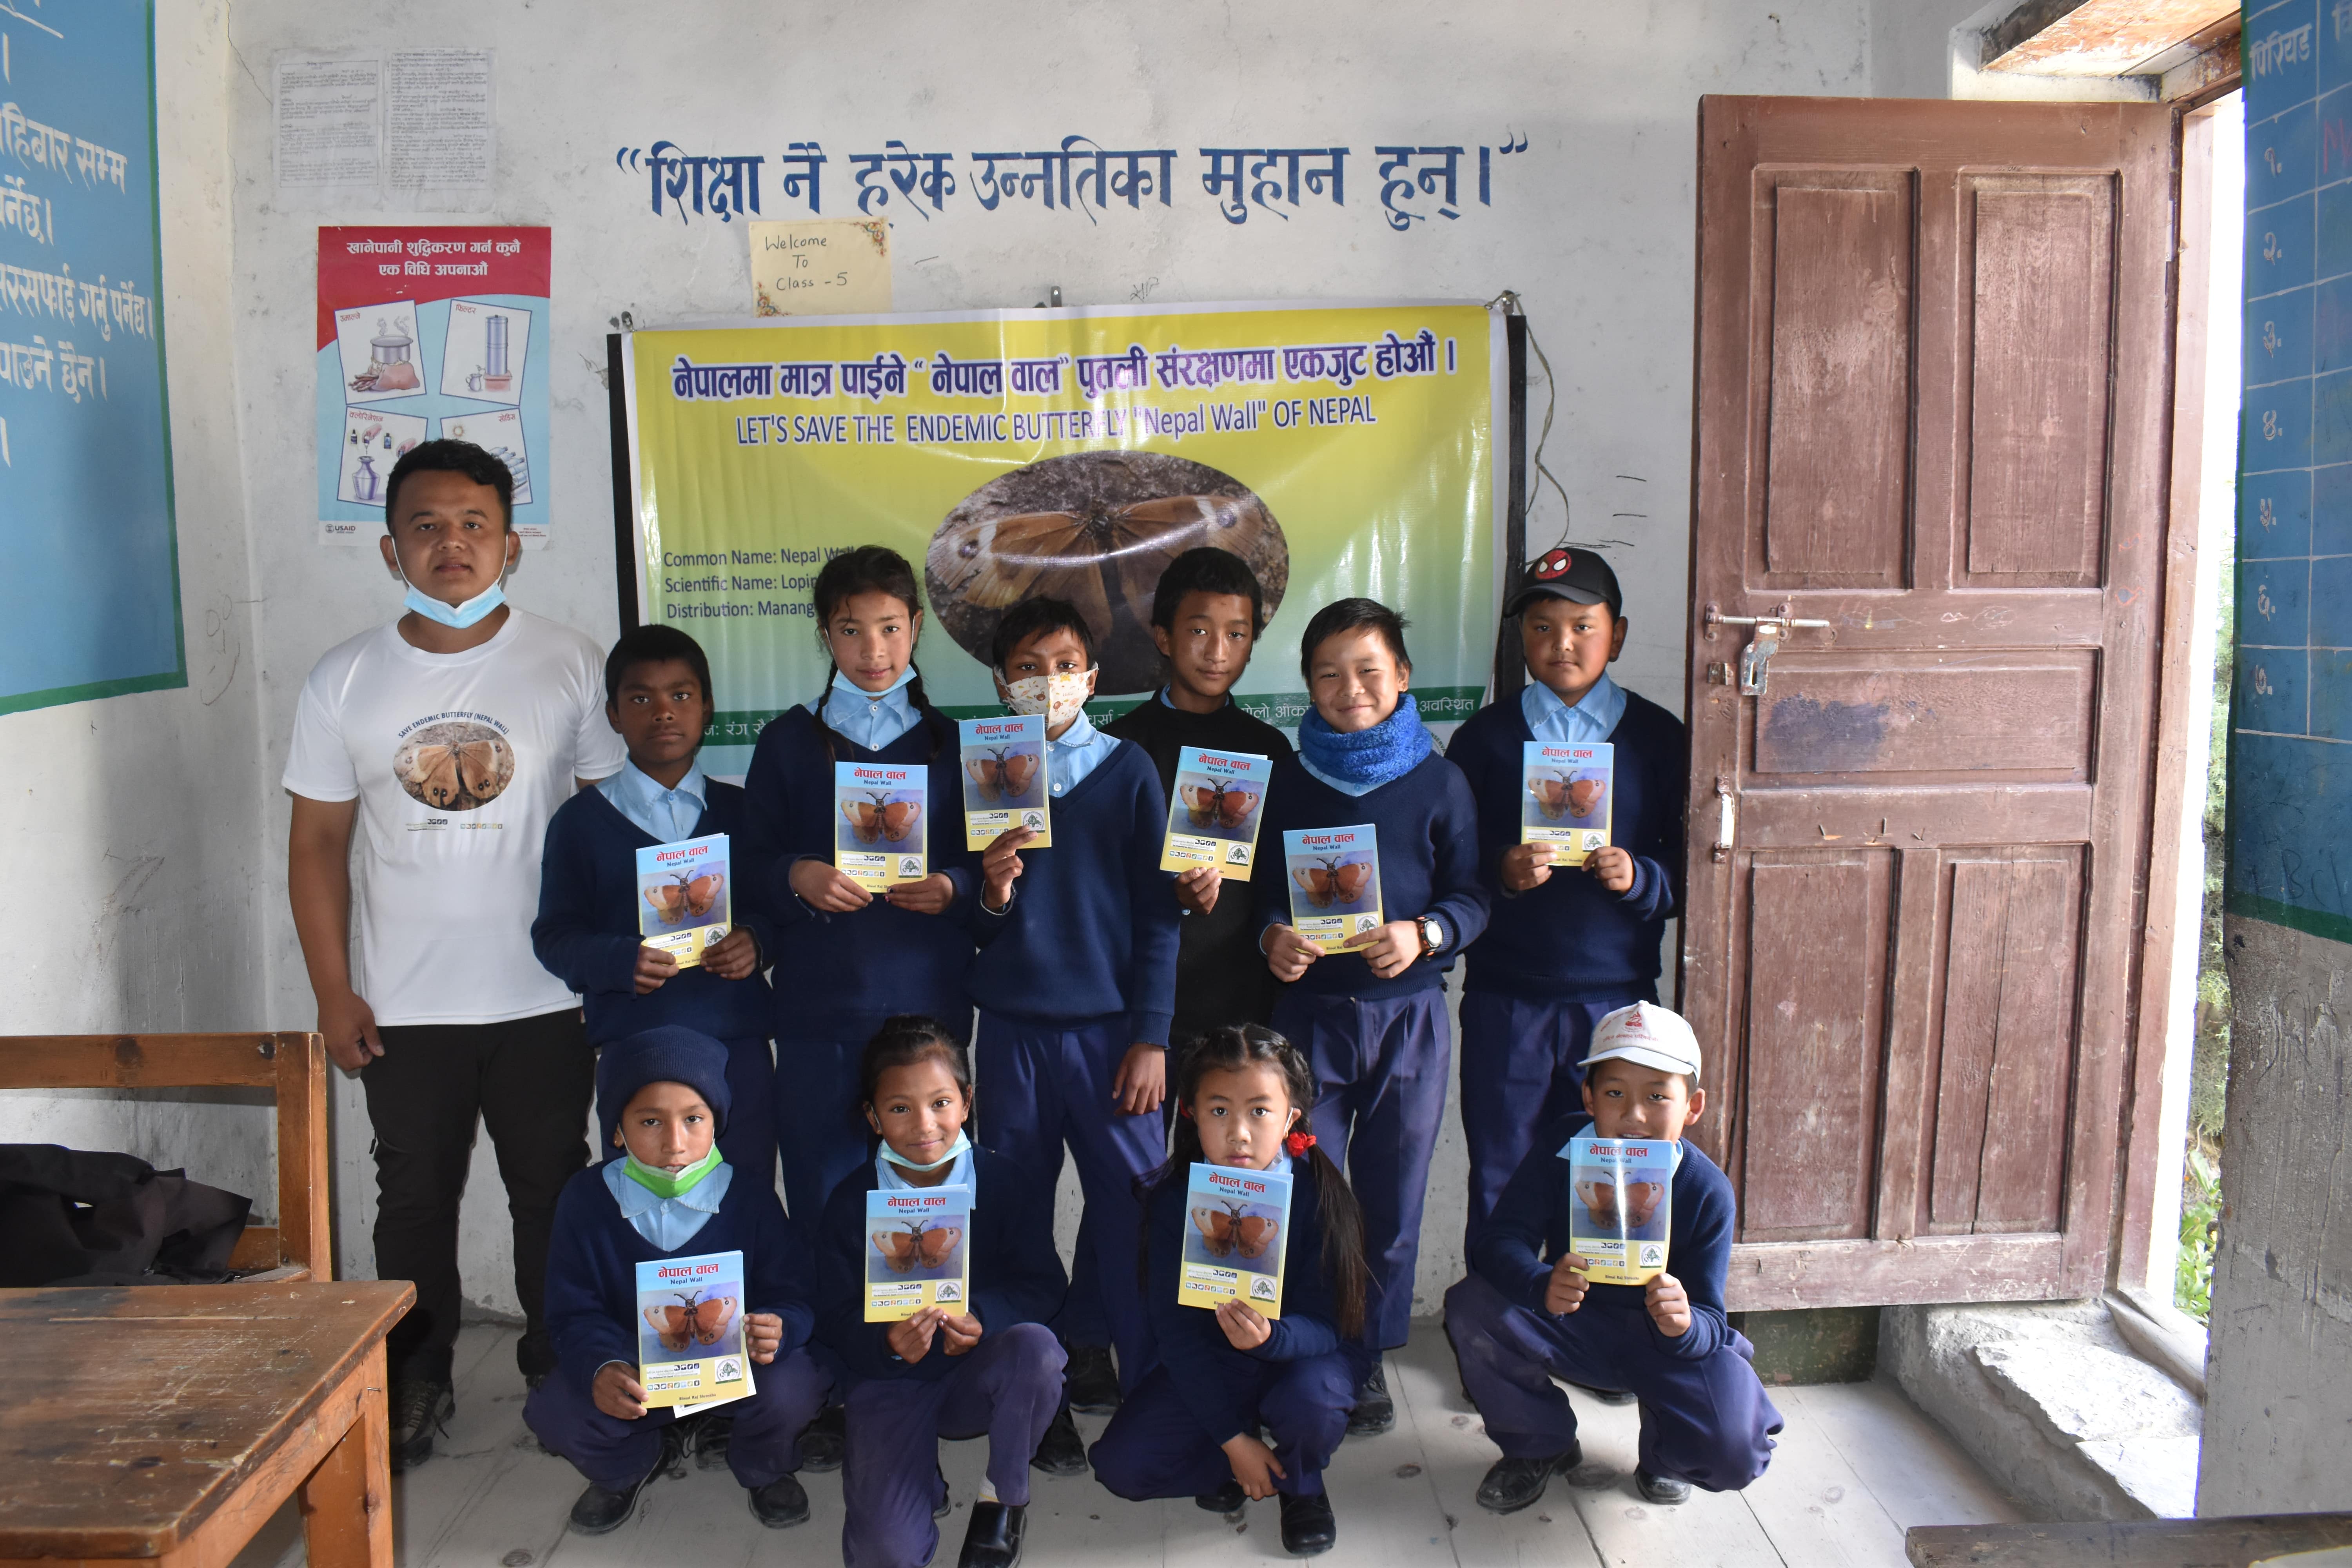 School Conservation Awareness Program for the conservation of Endemic Butterfly Species in trans-Himalayan Regions, Nepal,The project has been conducted for the conservation of endemic butterfly species namely; Lopinga lehmanni. The species has been considered very rare and less prioritized Himalayan butterfly taxa in the conservation.